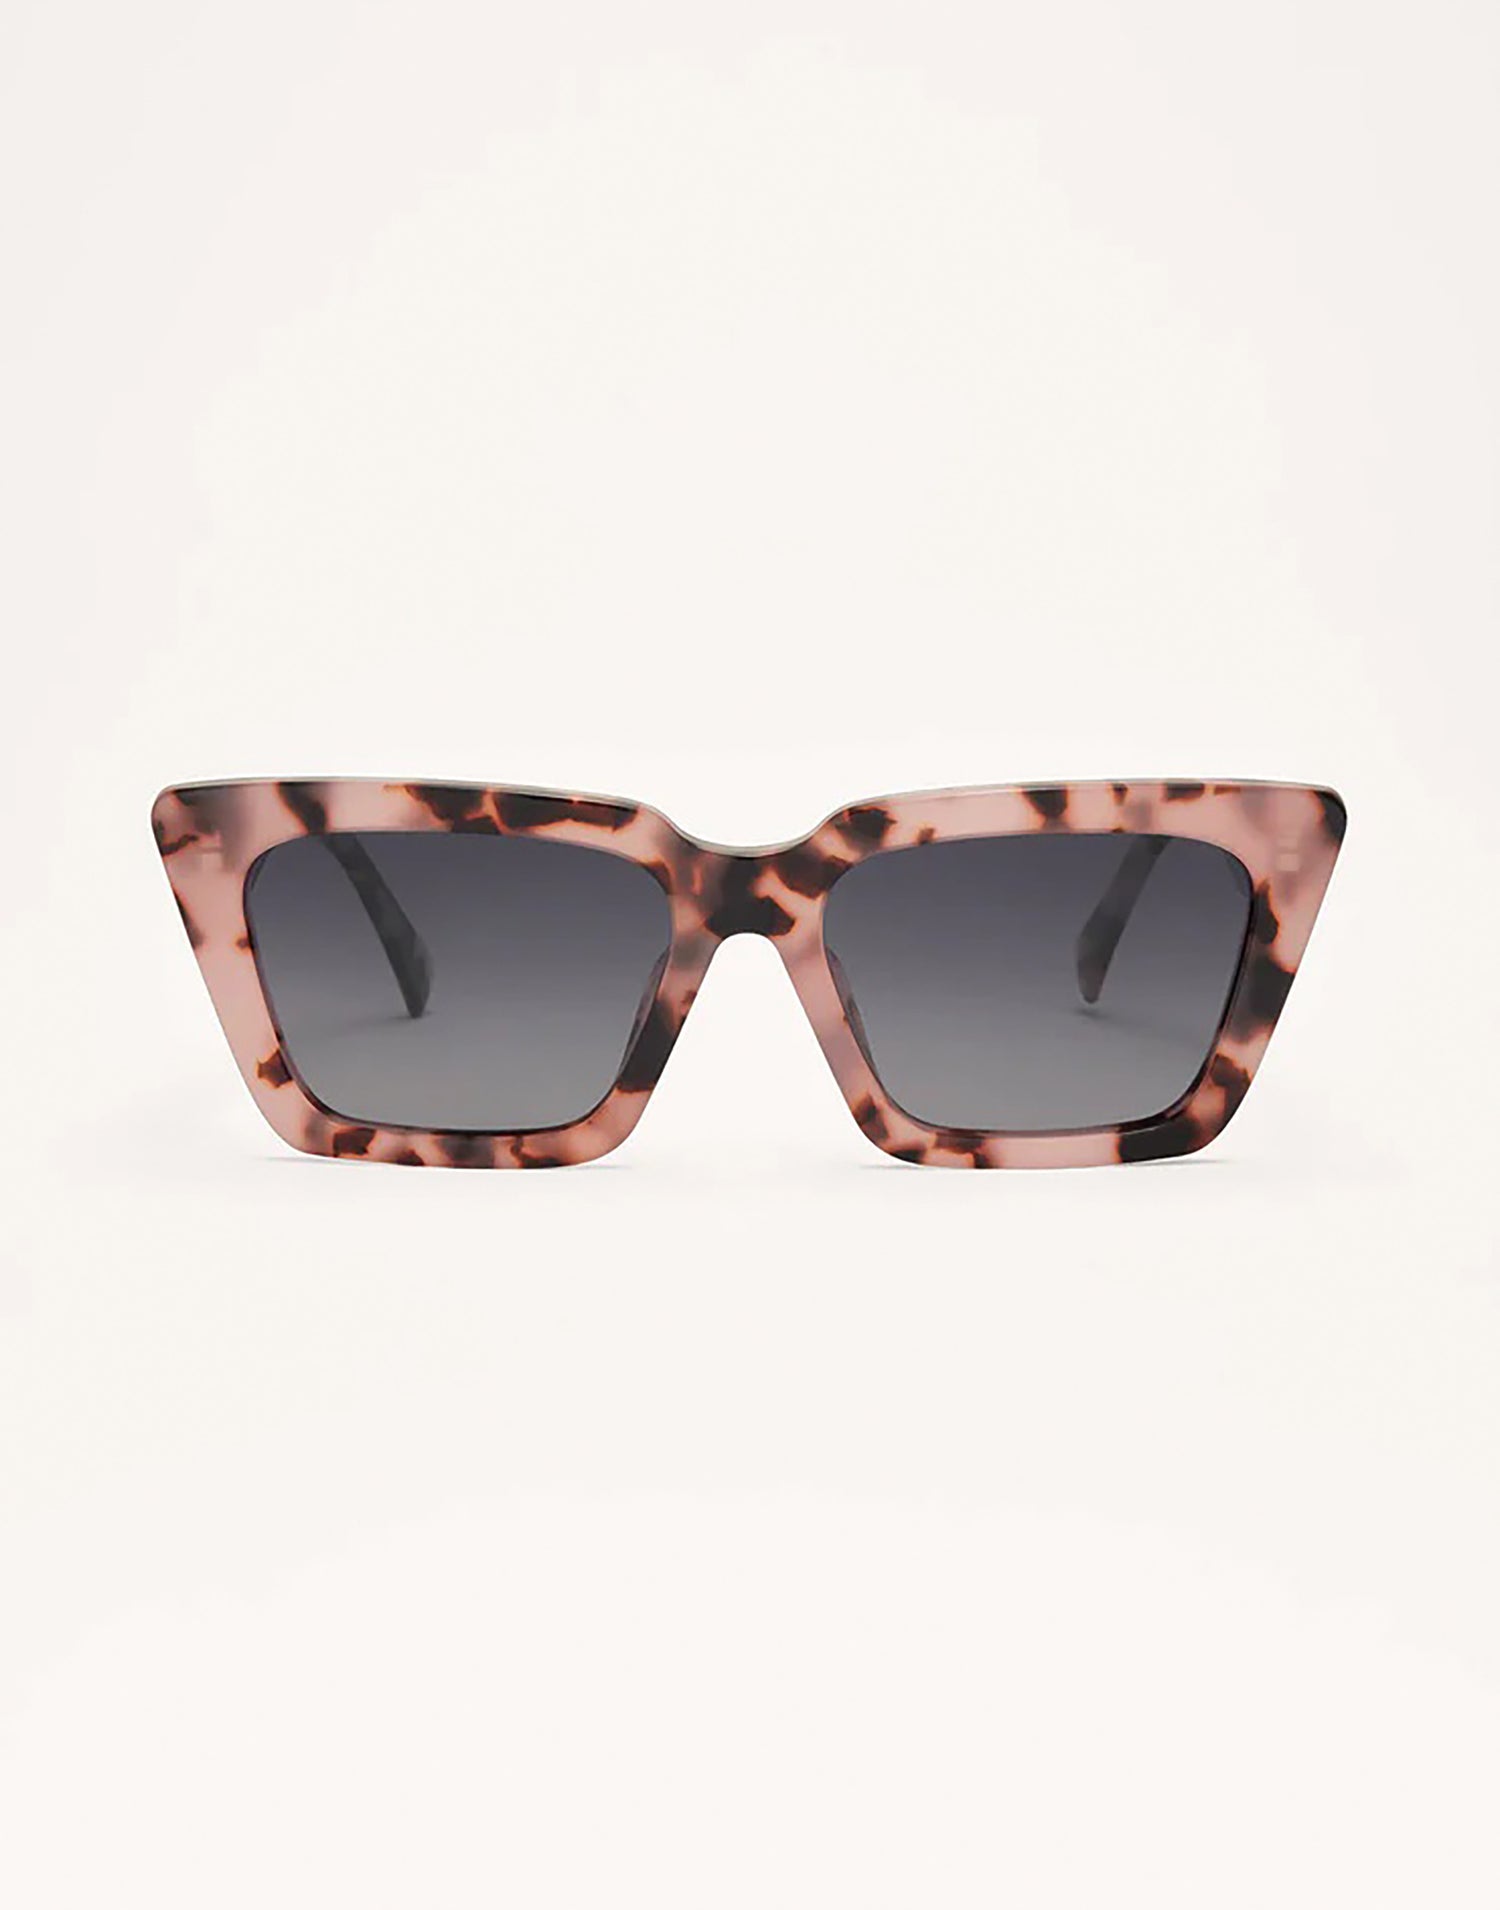 Feel Good Sunglasses by Z Supply in Rose Quartz - Front View